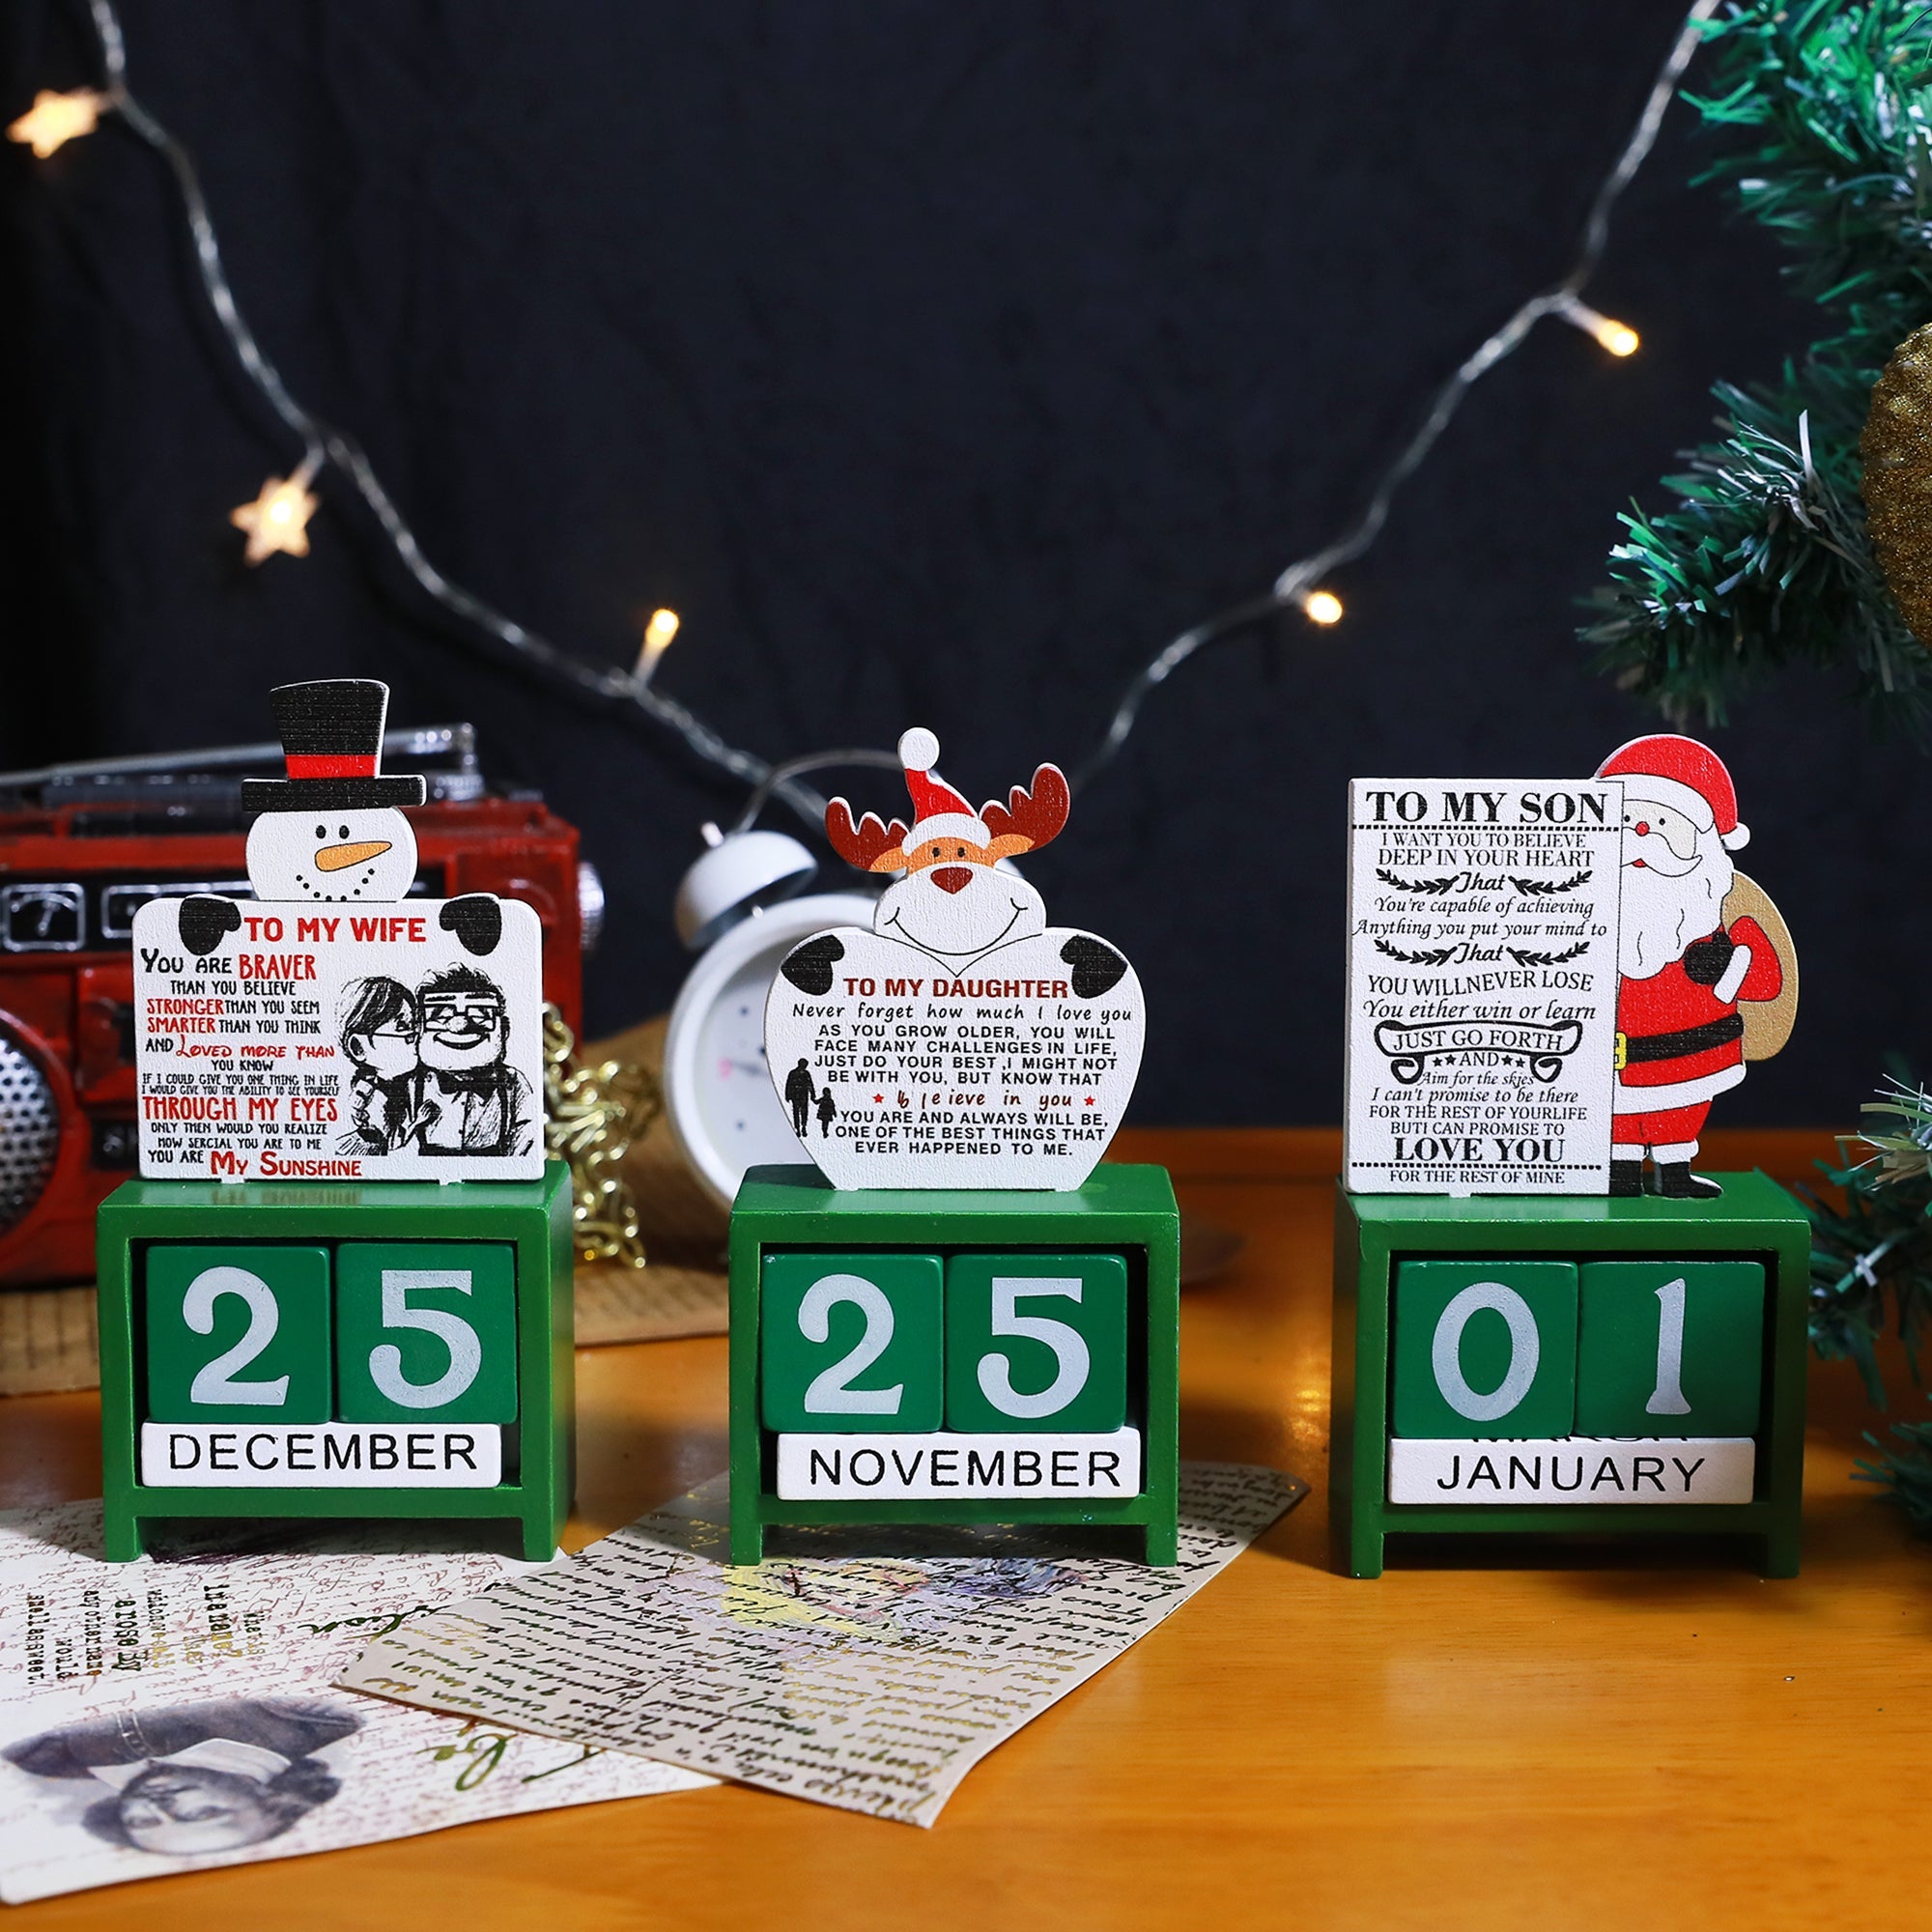 To My Son - Christmas Advent Countdown Calendar Number Date Wooden Blocks Tabletop Desk Calendar Decoration for Home Office Decoration - Family Watchs